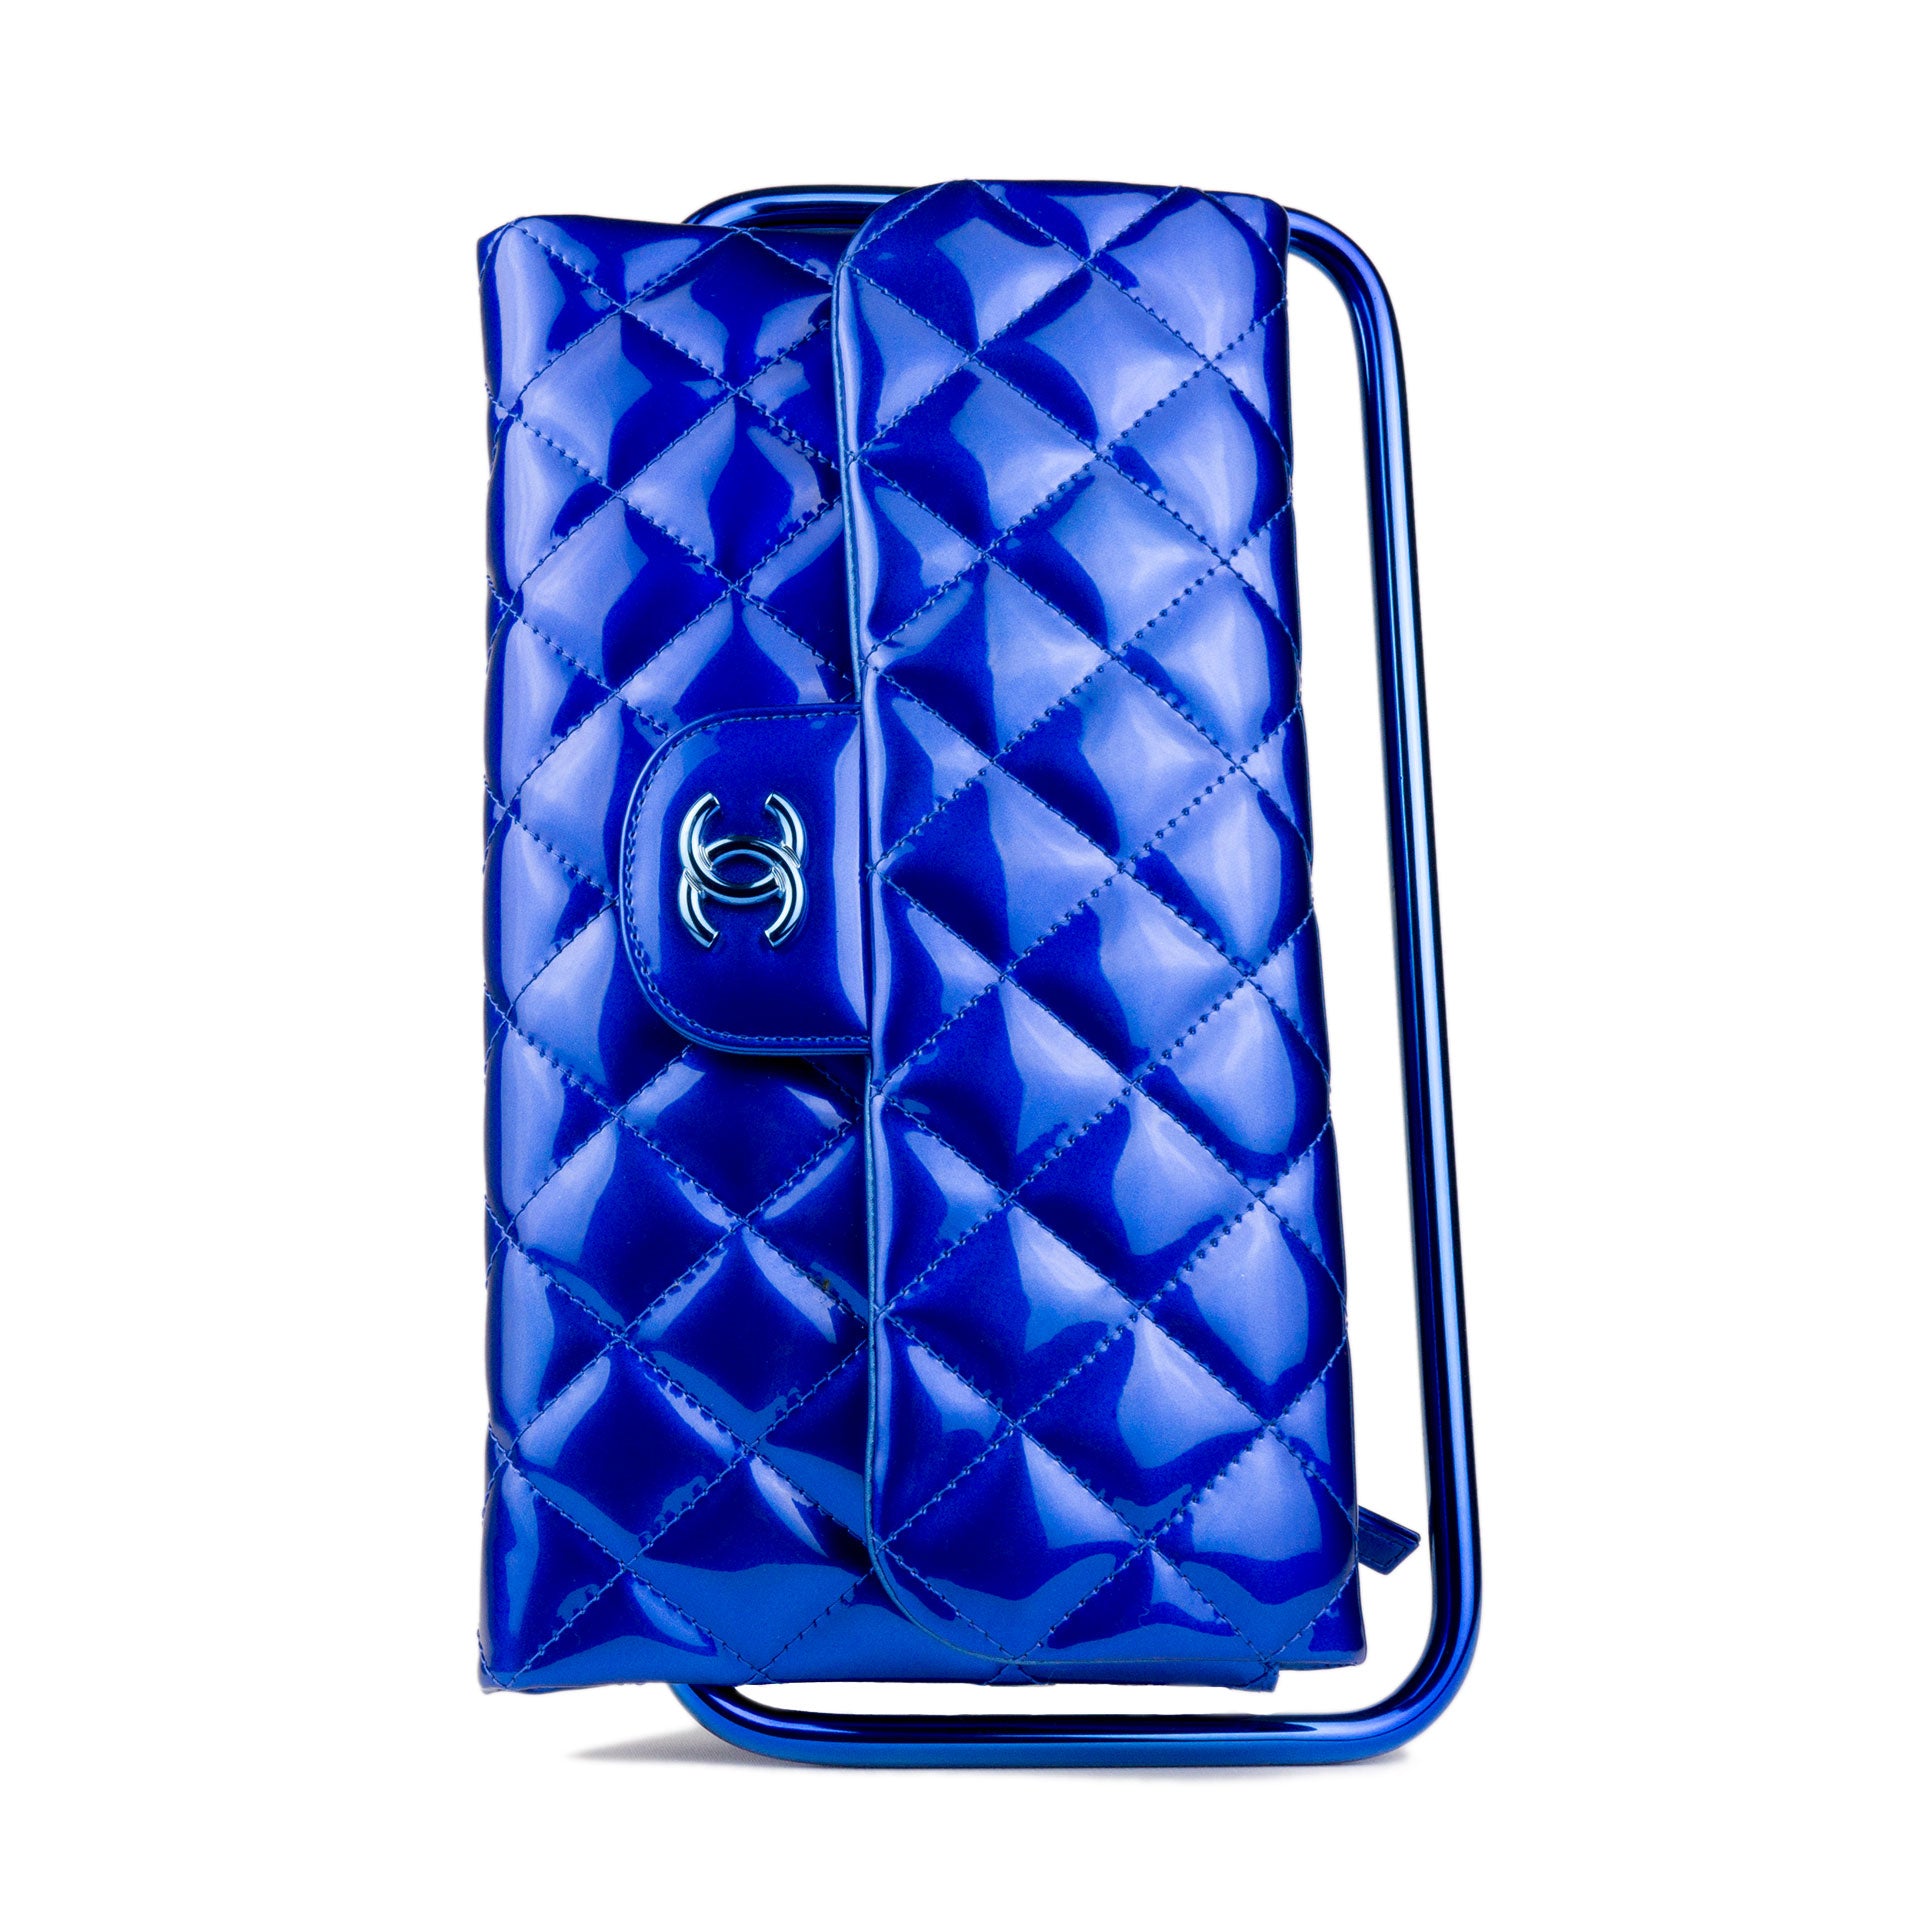 Chanel Classic Flap Patent Blue Frame Clutch